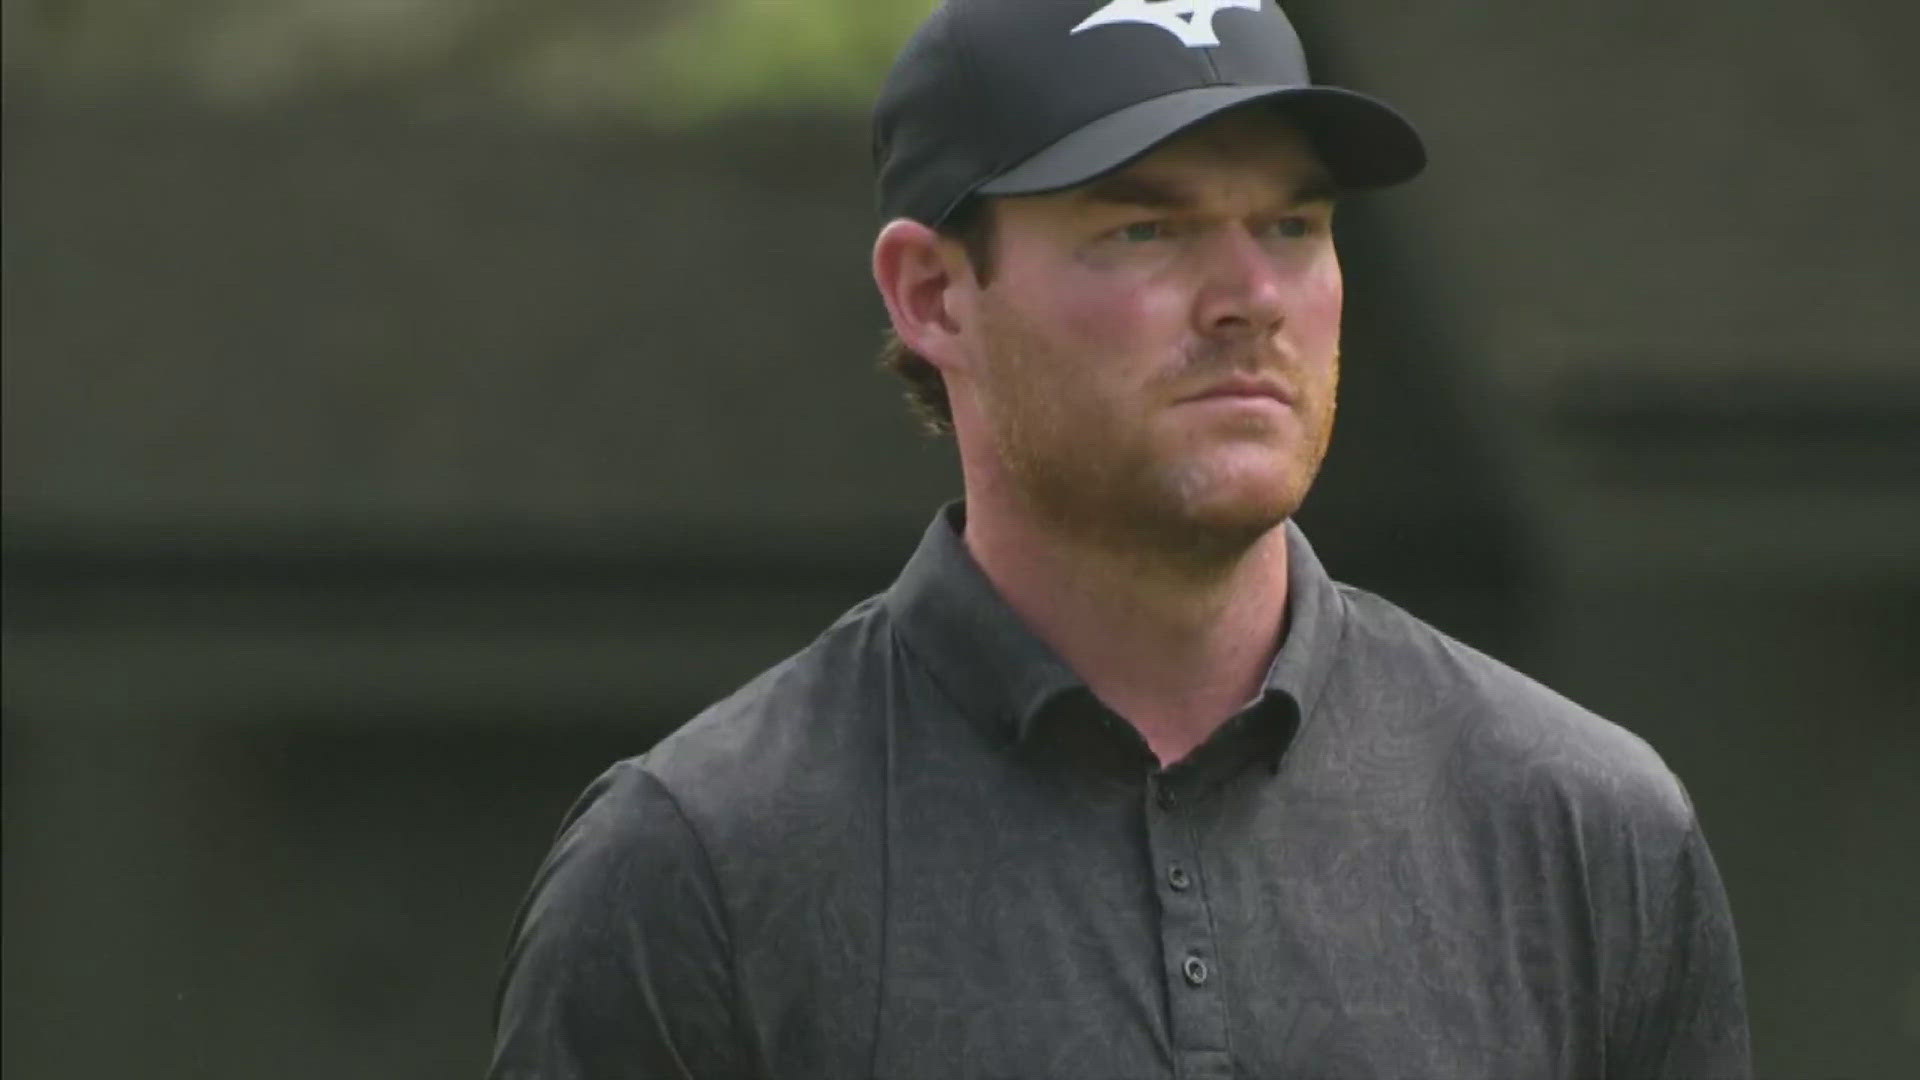 Two-time PGA Tour winner Grayson Murray has died at the age of 30. The PGA Tour and his management company GSE Worldwide confirmed the death Saturday.